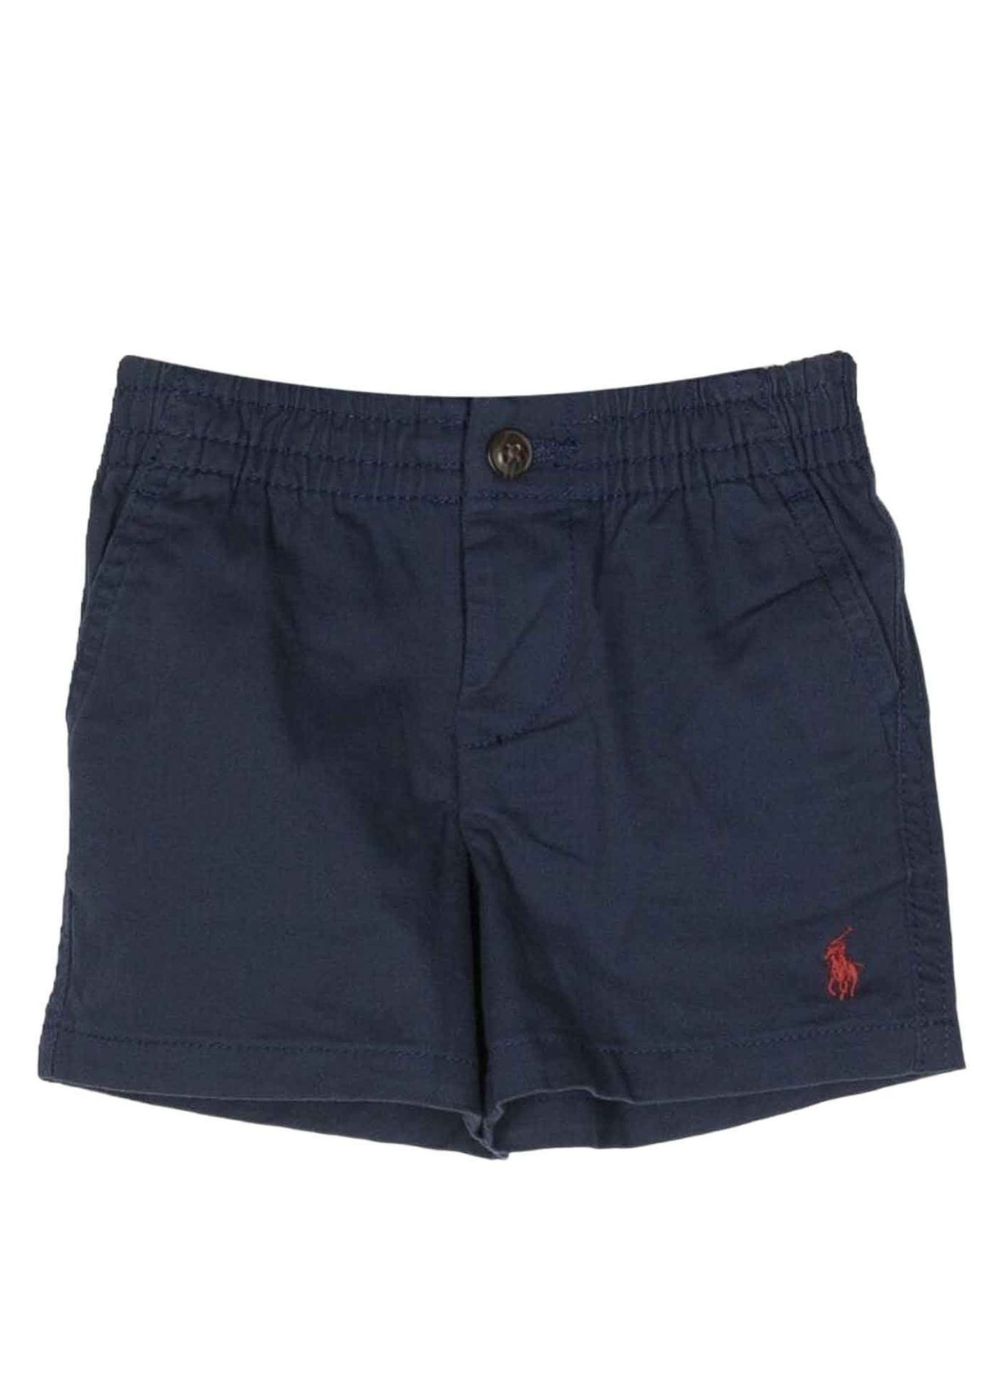 Featured image for “Polo Ralph Lauren Shorts Neonato”